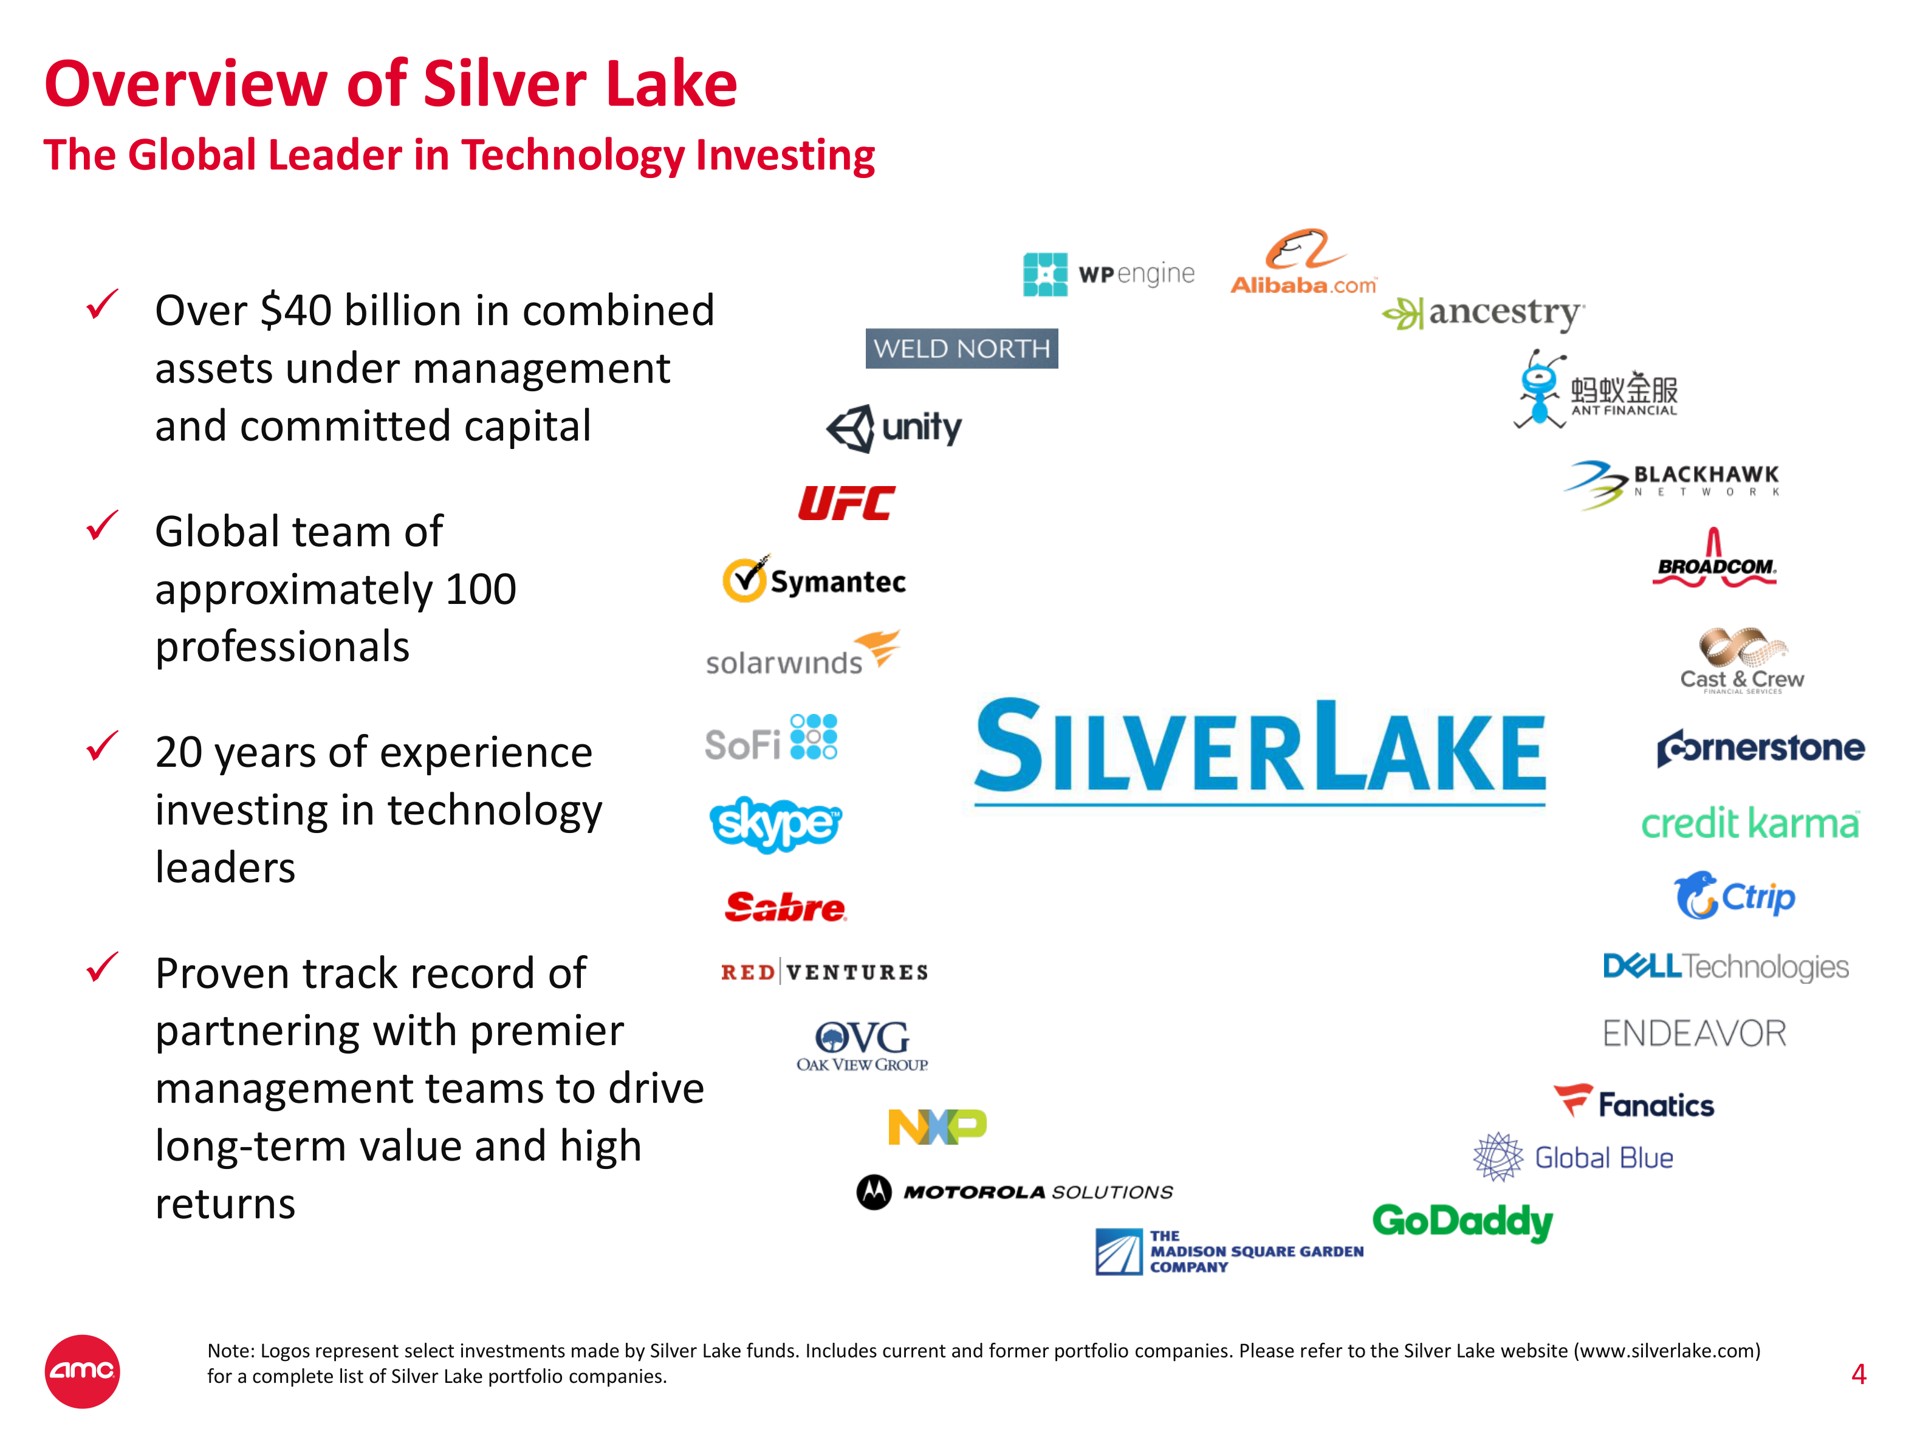 overview of silver lake the global leader in technology investing over billion in combined assets under management and committed capital global team approximately years experience leaders unity orc come see ake management teams to drive long term value and high fanatics global blue | AMC